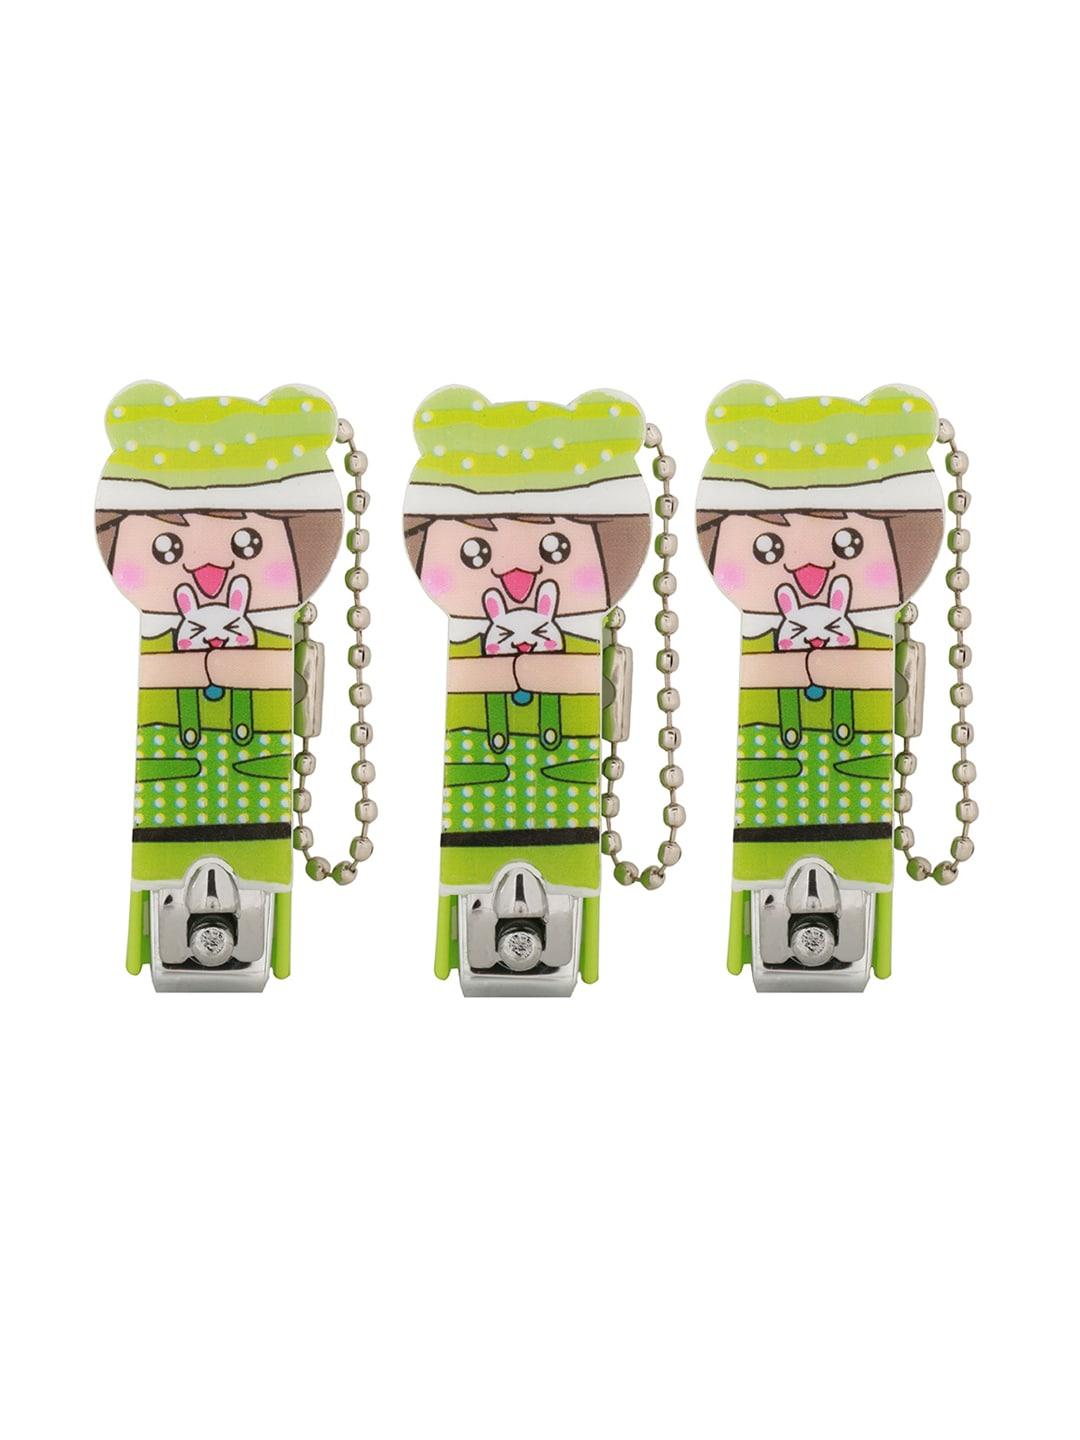 pokory kids pack of 3 green nail cutters - 100 gm each